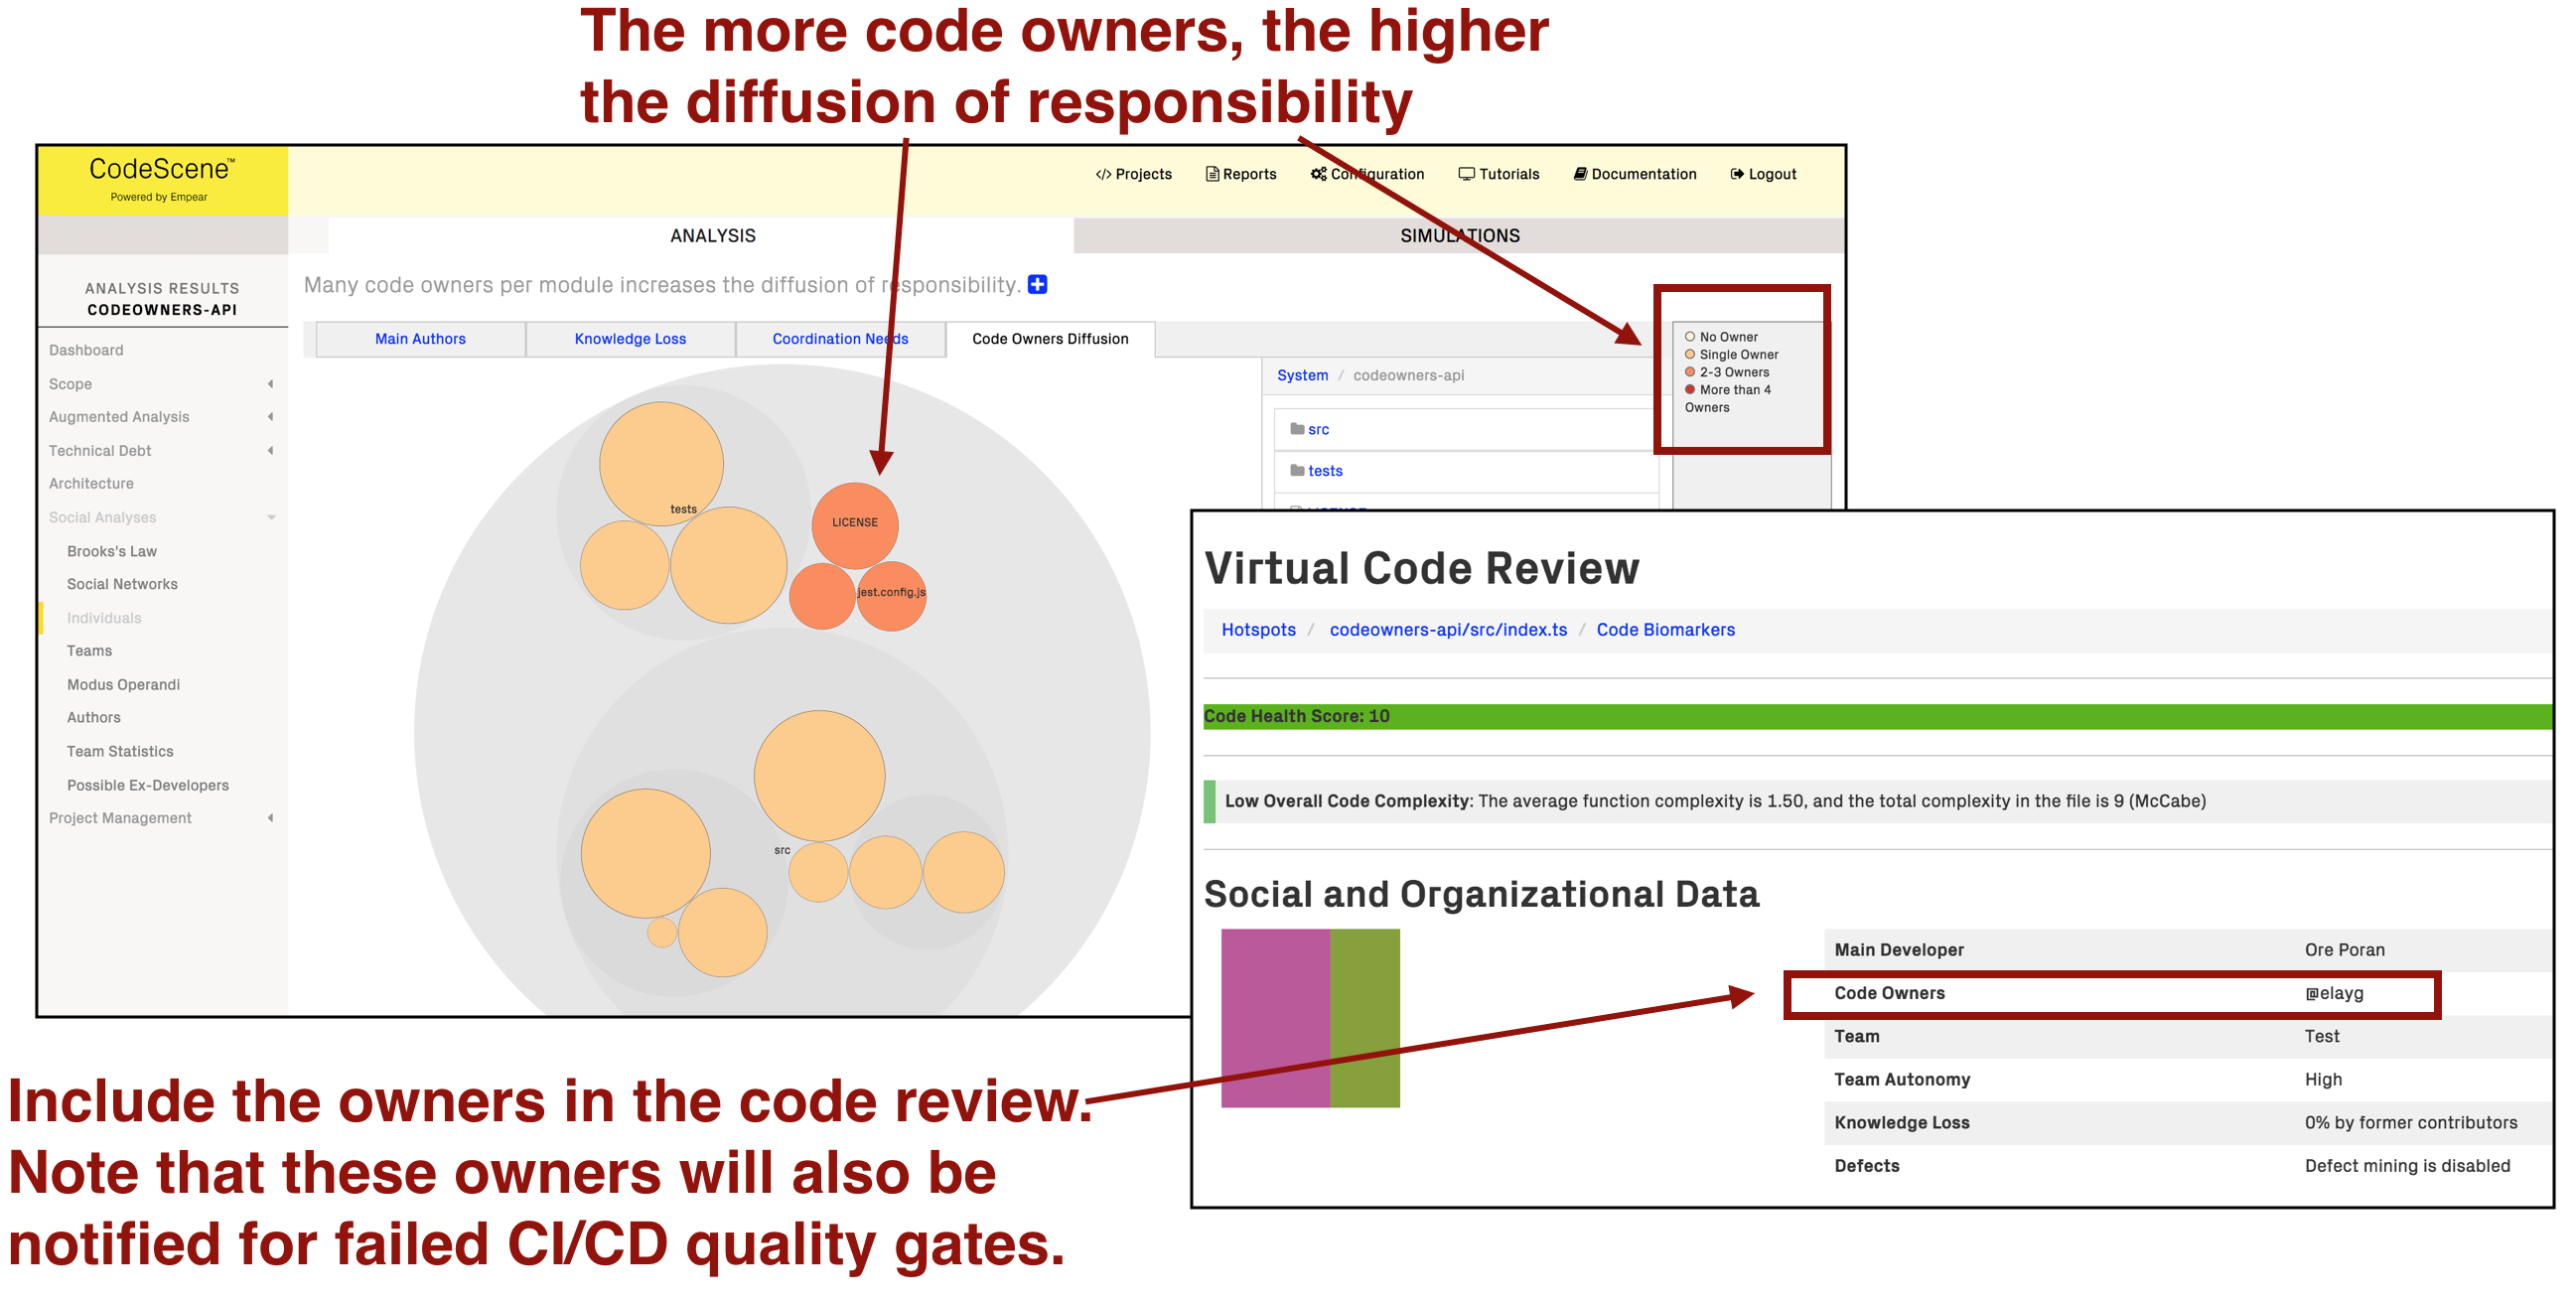 CodeScene visualizes the code owners.